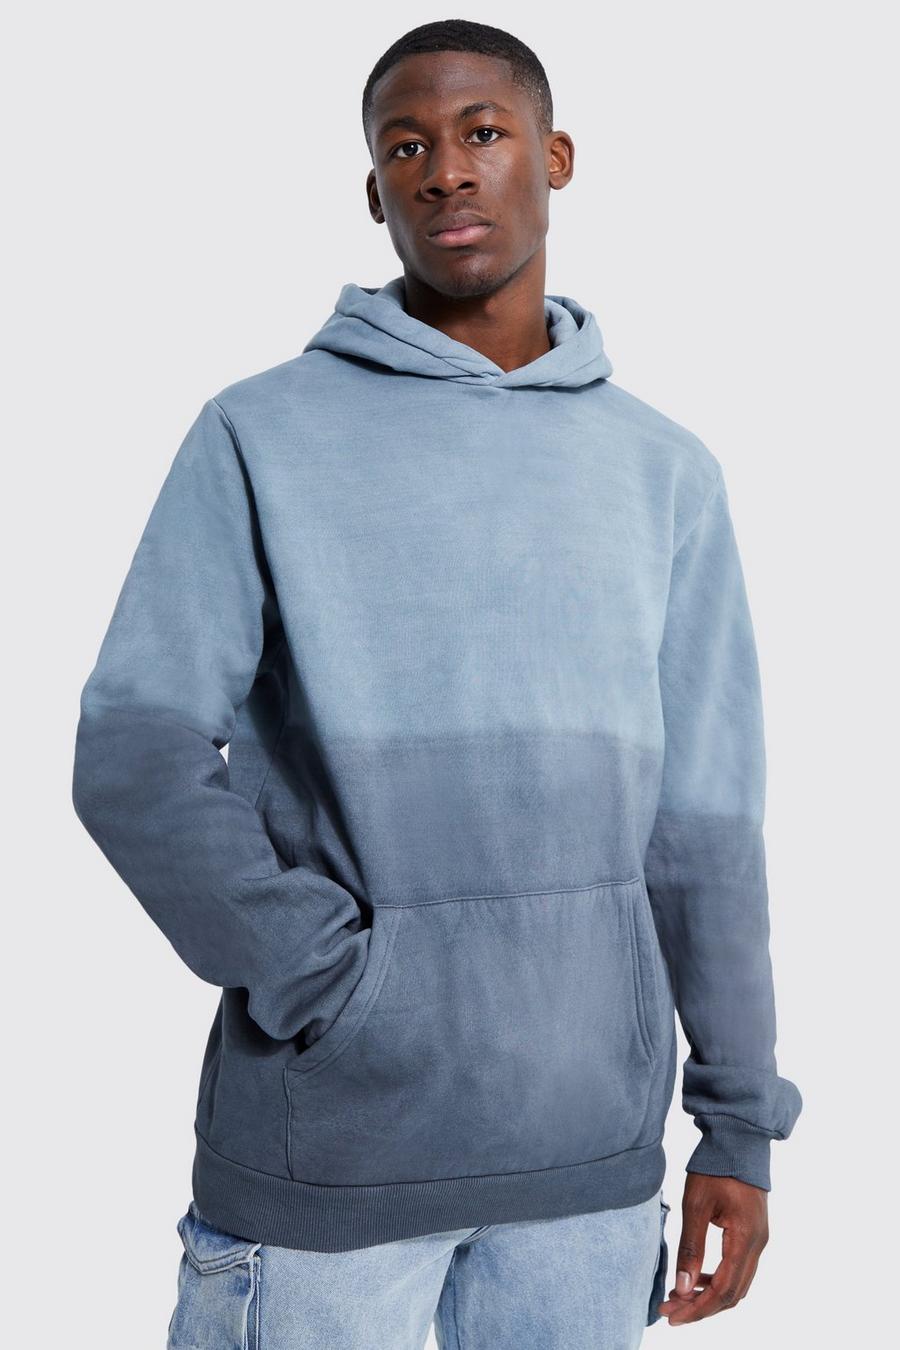 Charcoal grey Tall Oversized Ombre Tie Dye Hoodie